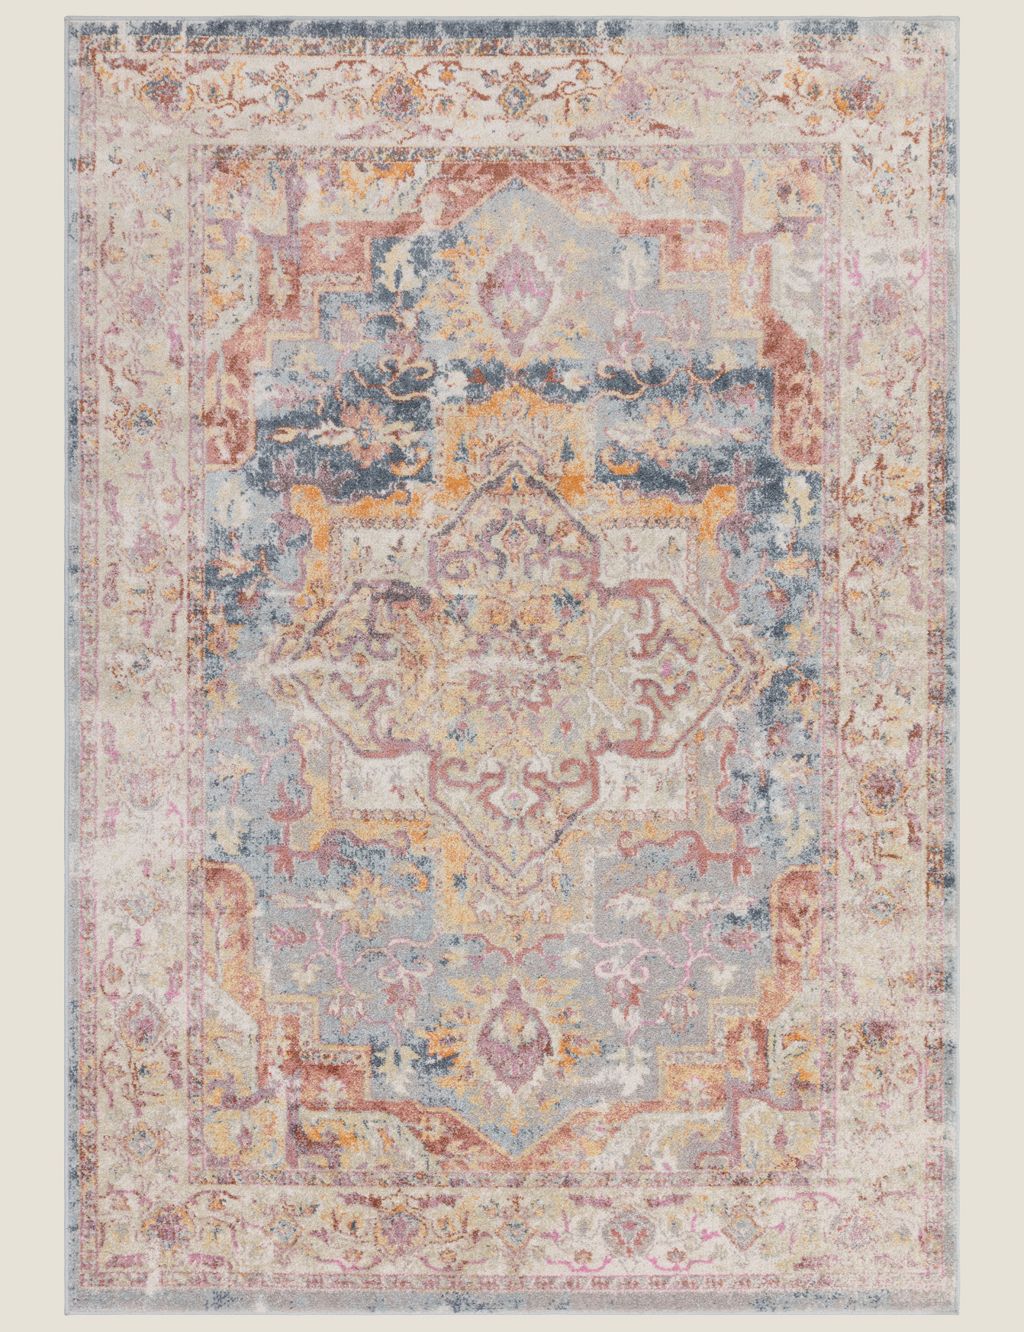 Flores Azin Rug 1 of 4